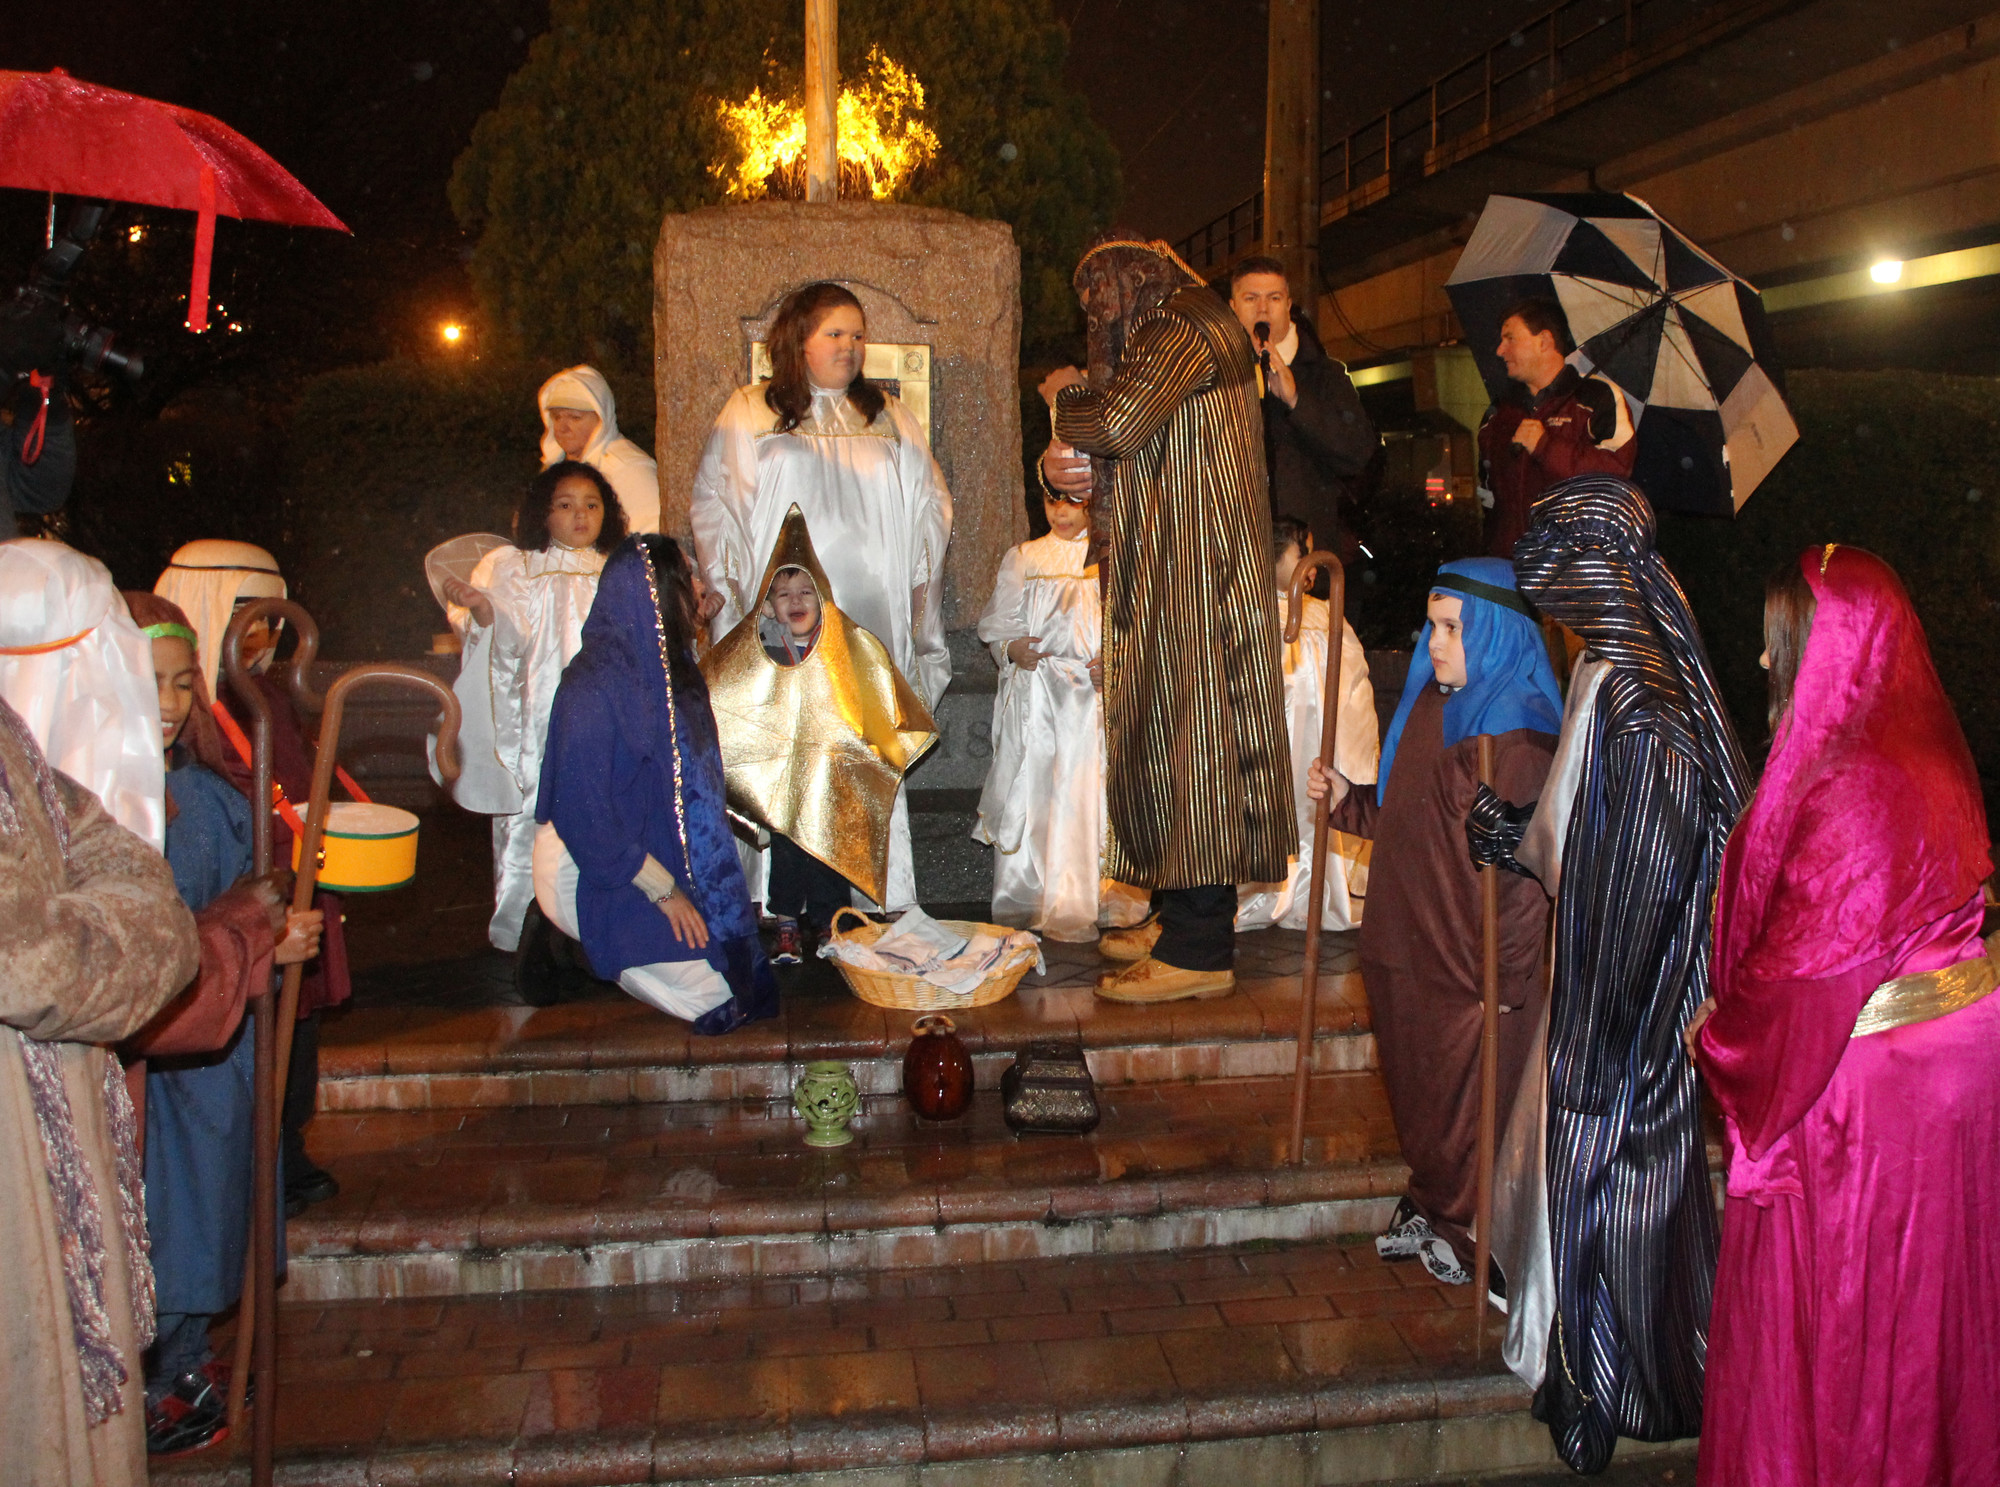 Connect Church members performed the Christmas pageant.